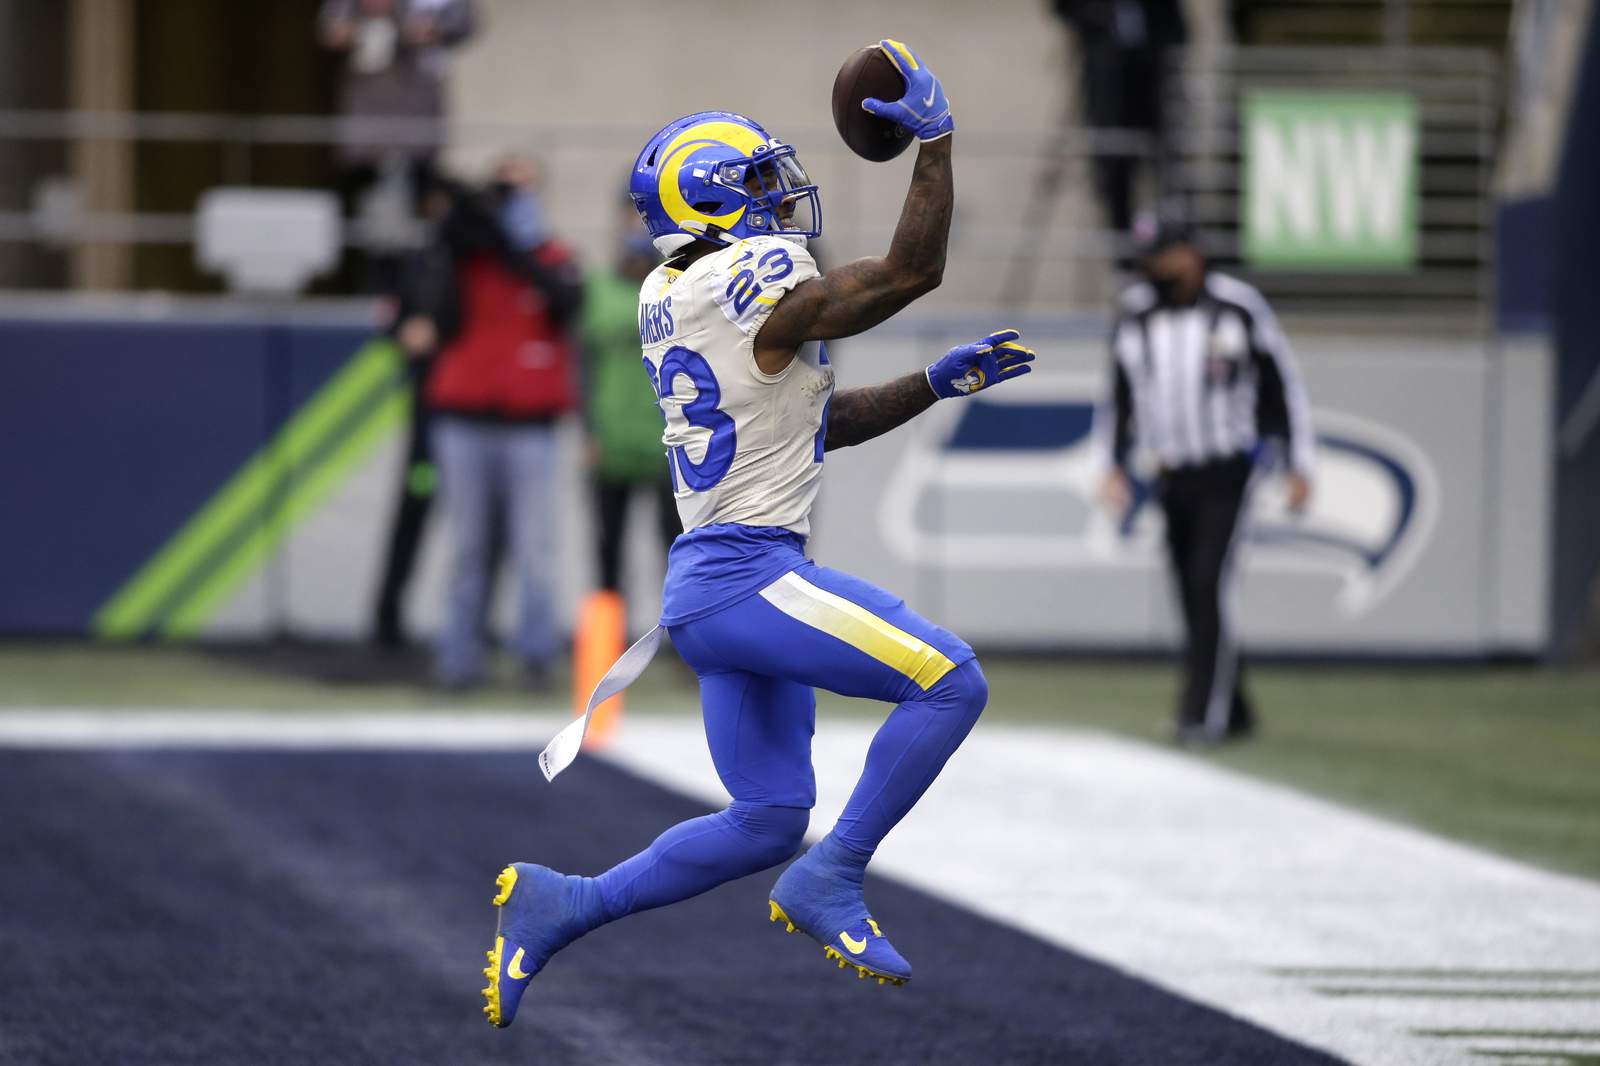 Rams get better of division rivals, toppling Seahawks 30-20